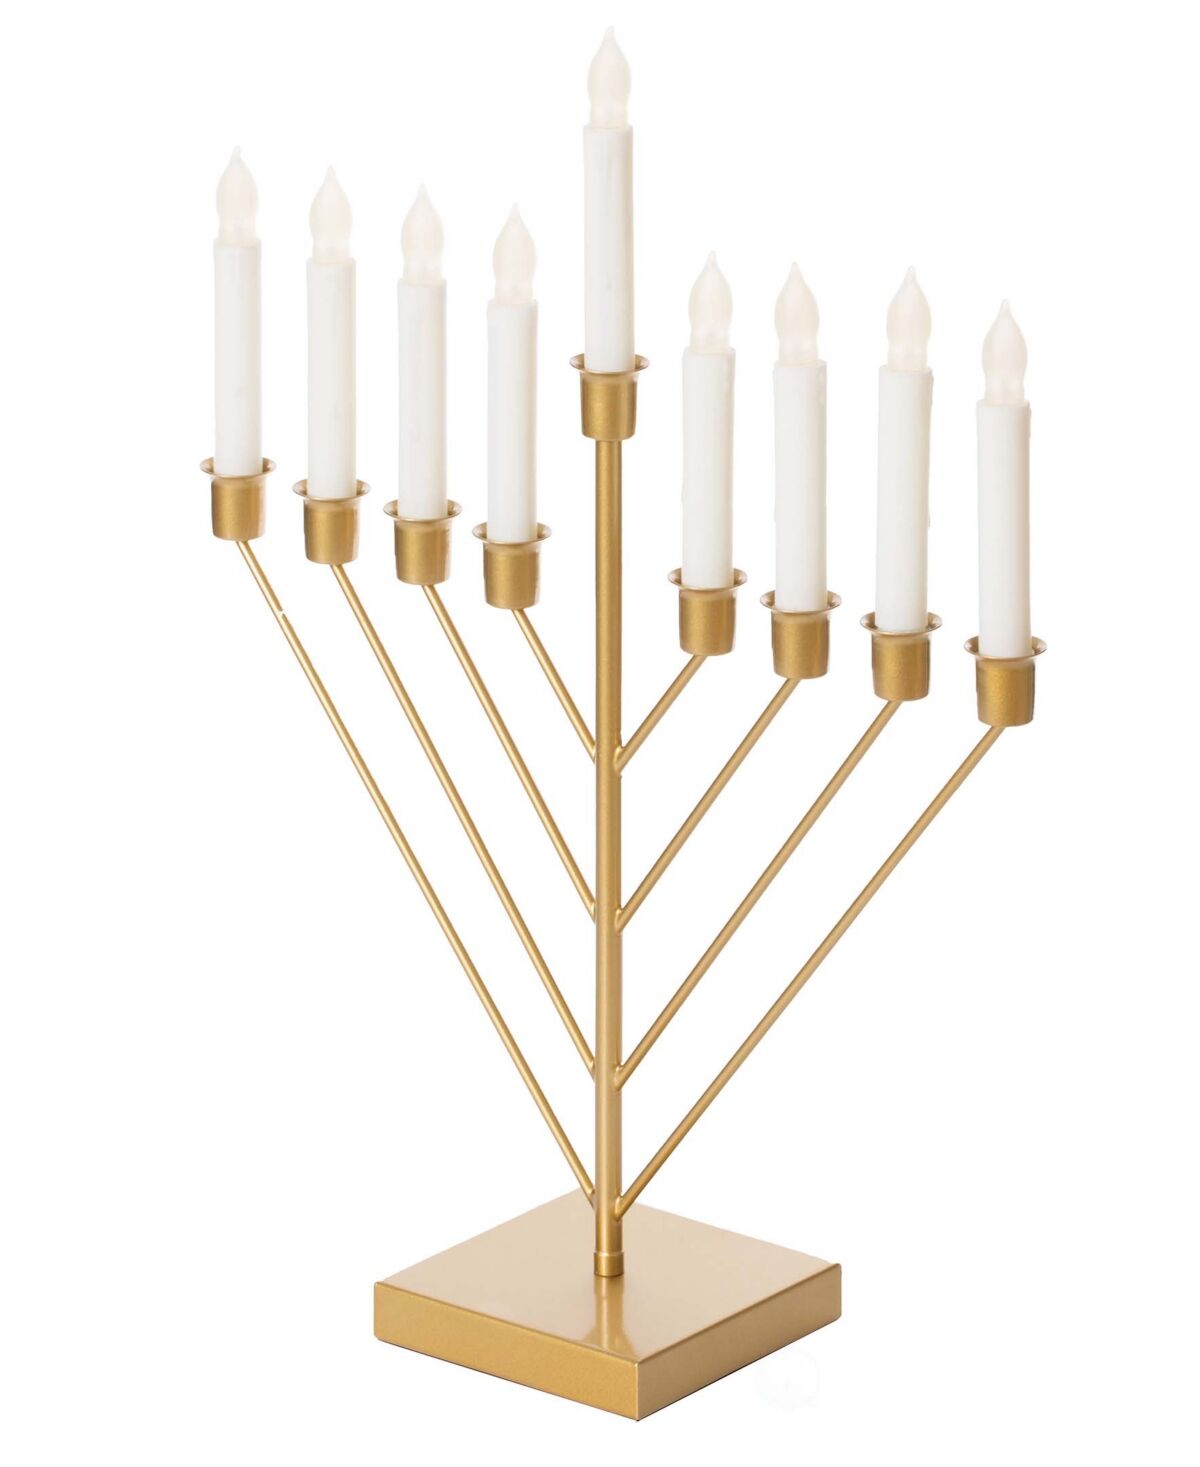 Vintiquewise 9 Branch Electric Chabad Judaic Chanukah Menorah with Led Candle Design Candlestick - Gold-Tone